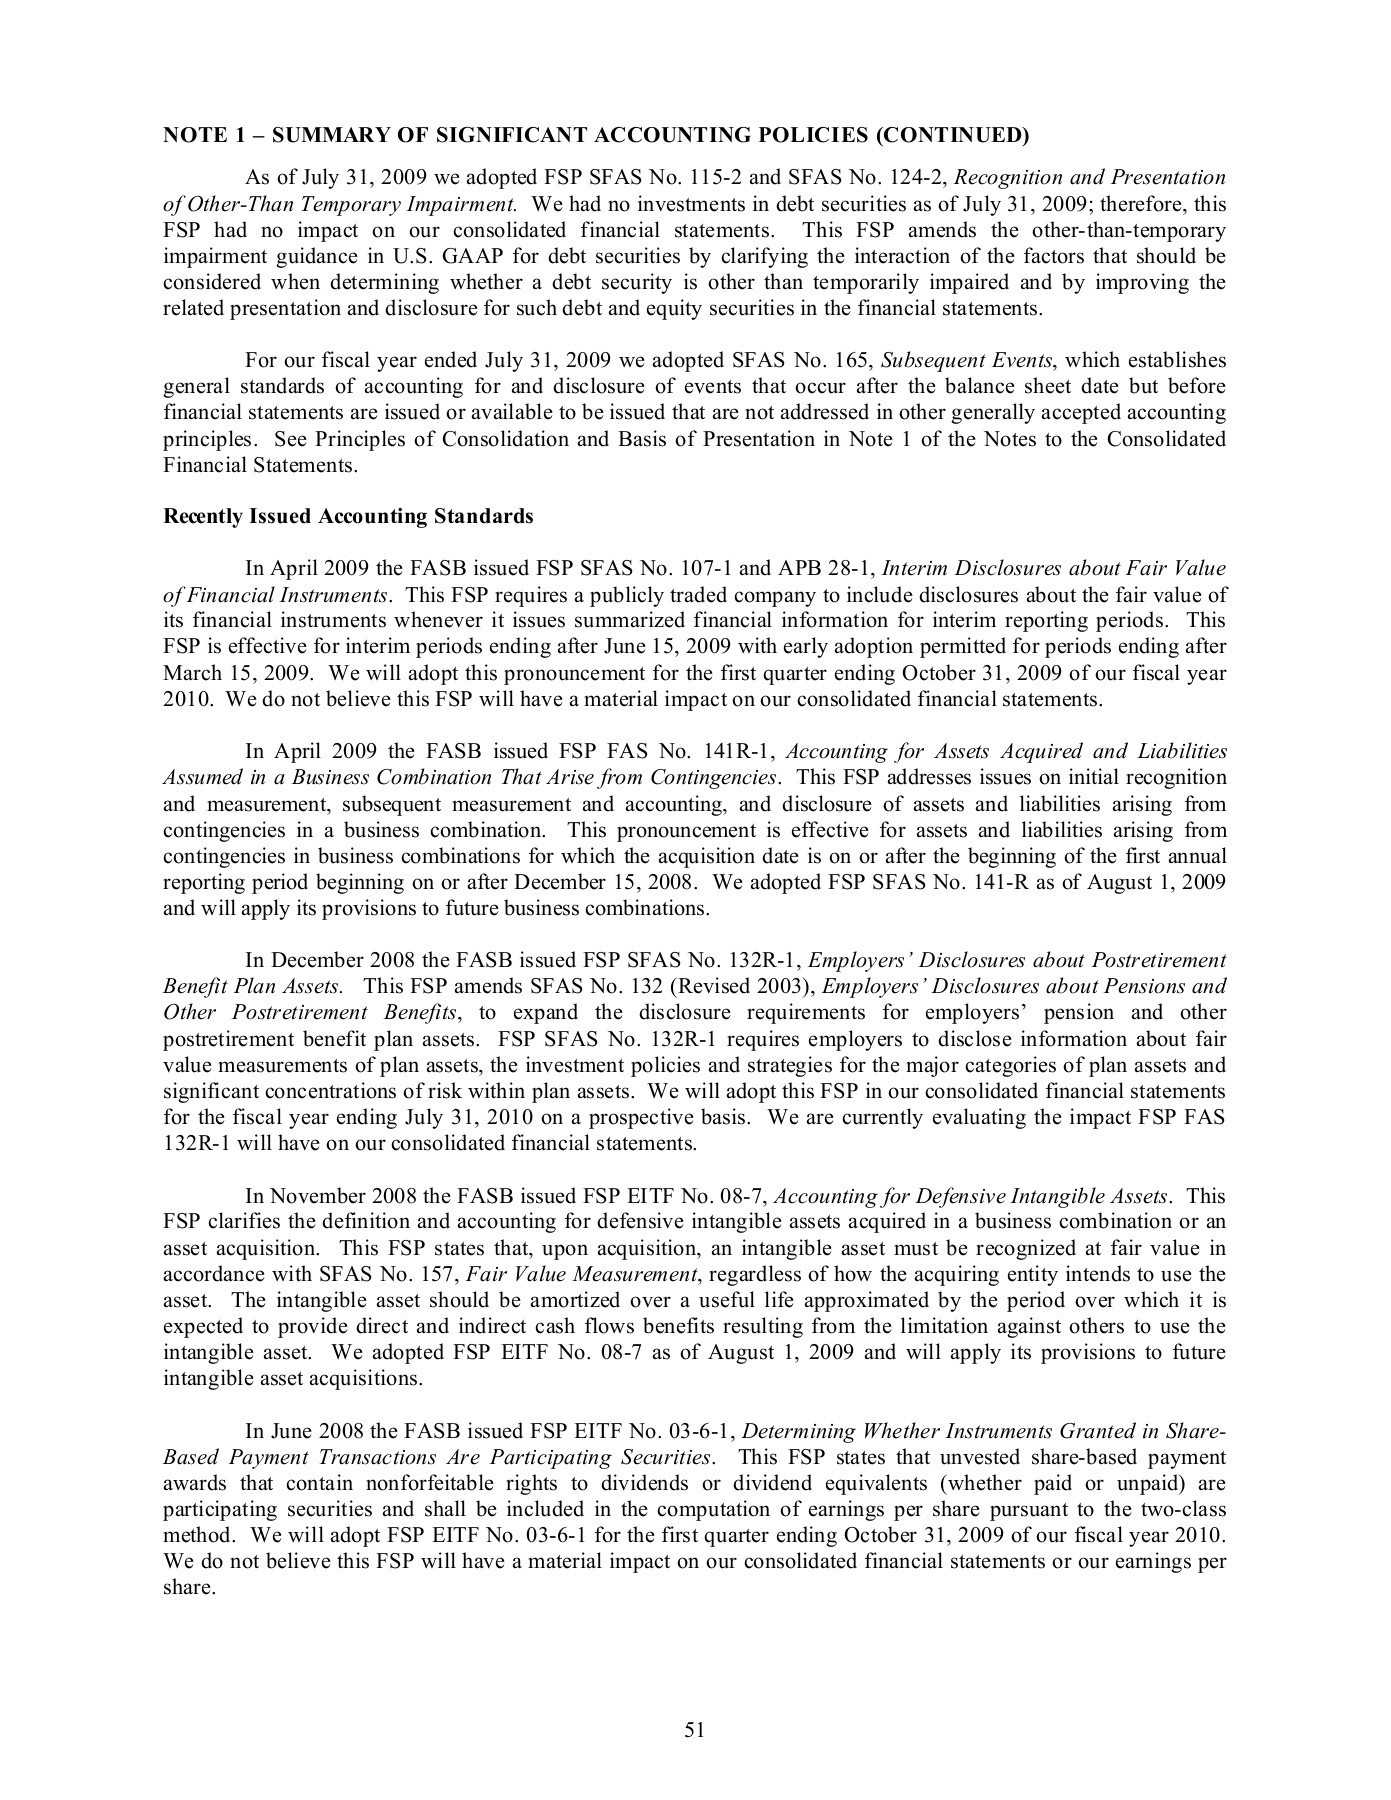 10 Annual Report Cover Letter Sample | Cover Letter Pertaining To Summary Annual Report Template